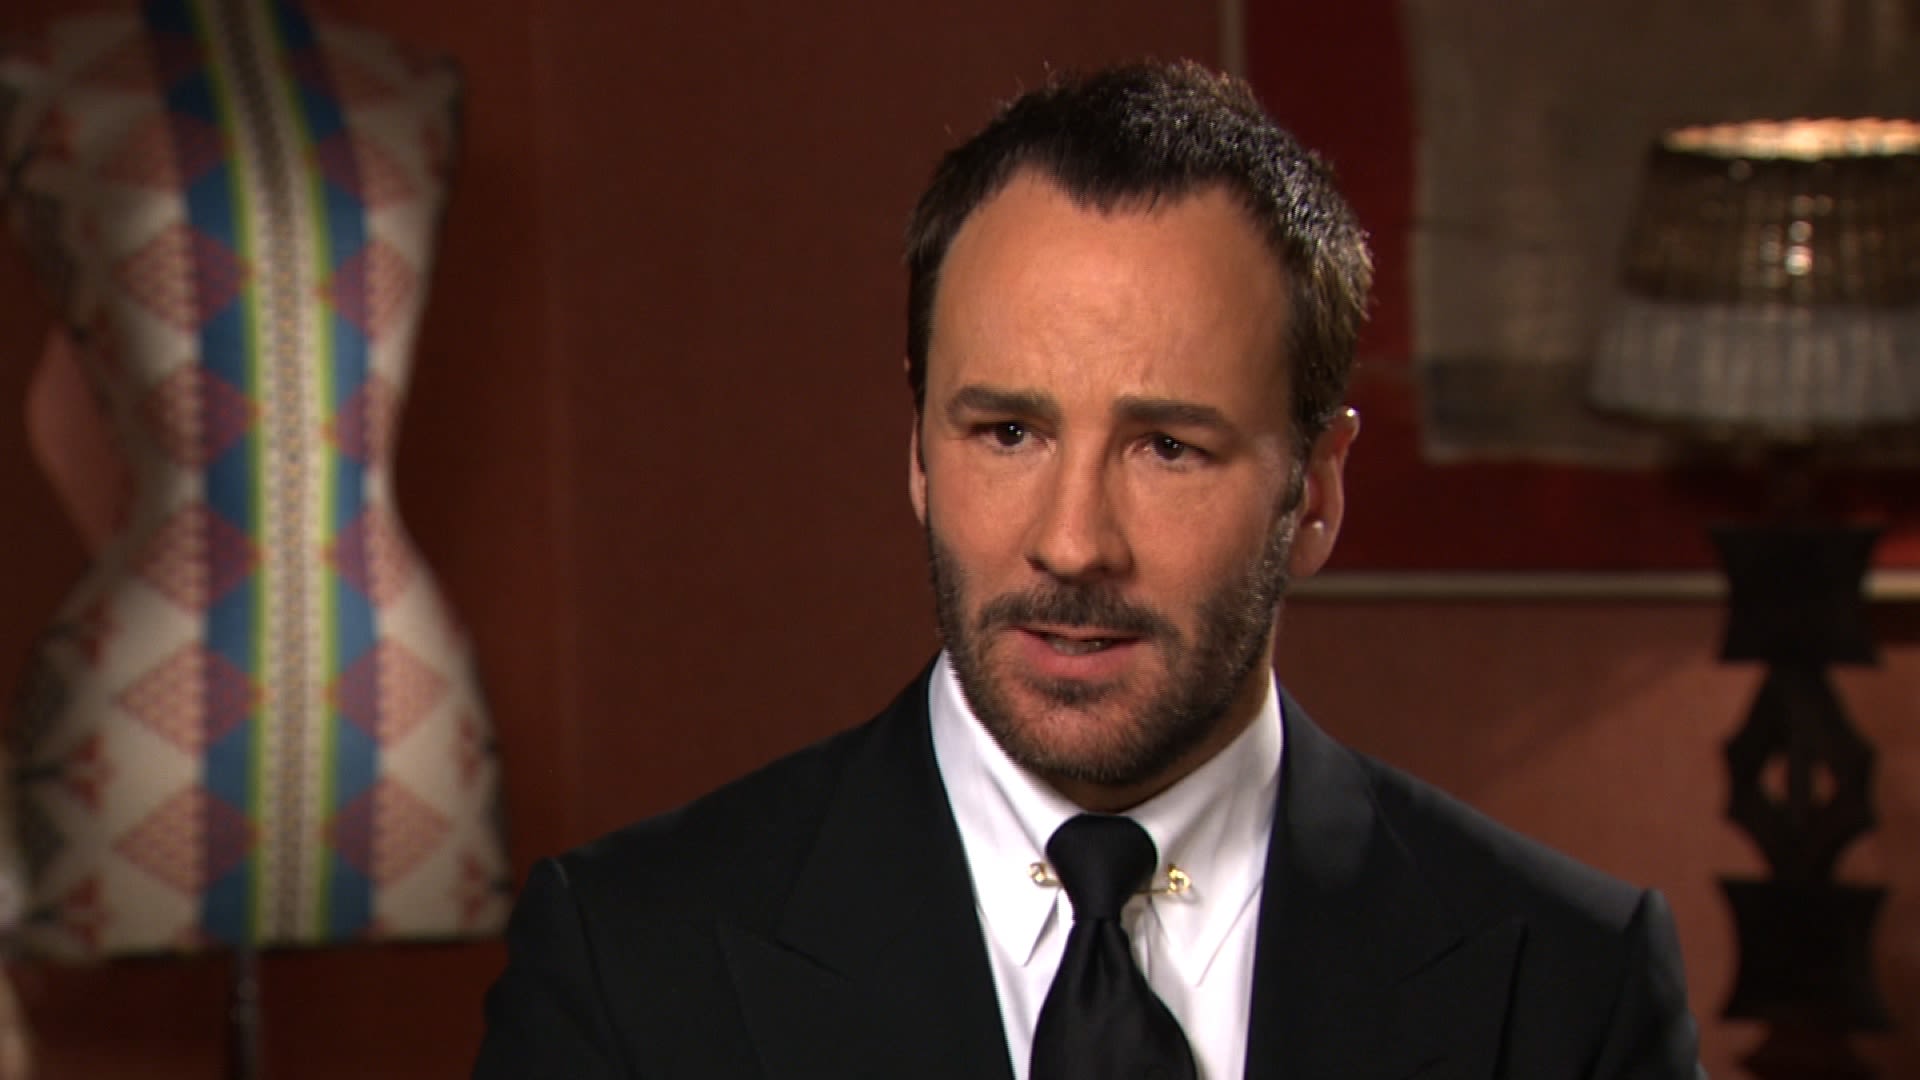 Luxury brand Tom Ford in talks to be acquired by Estee Lauder